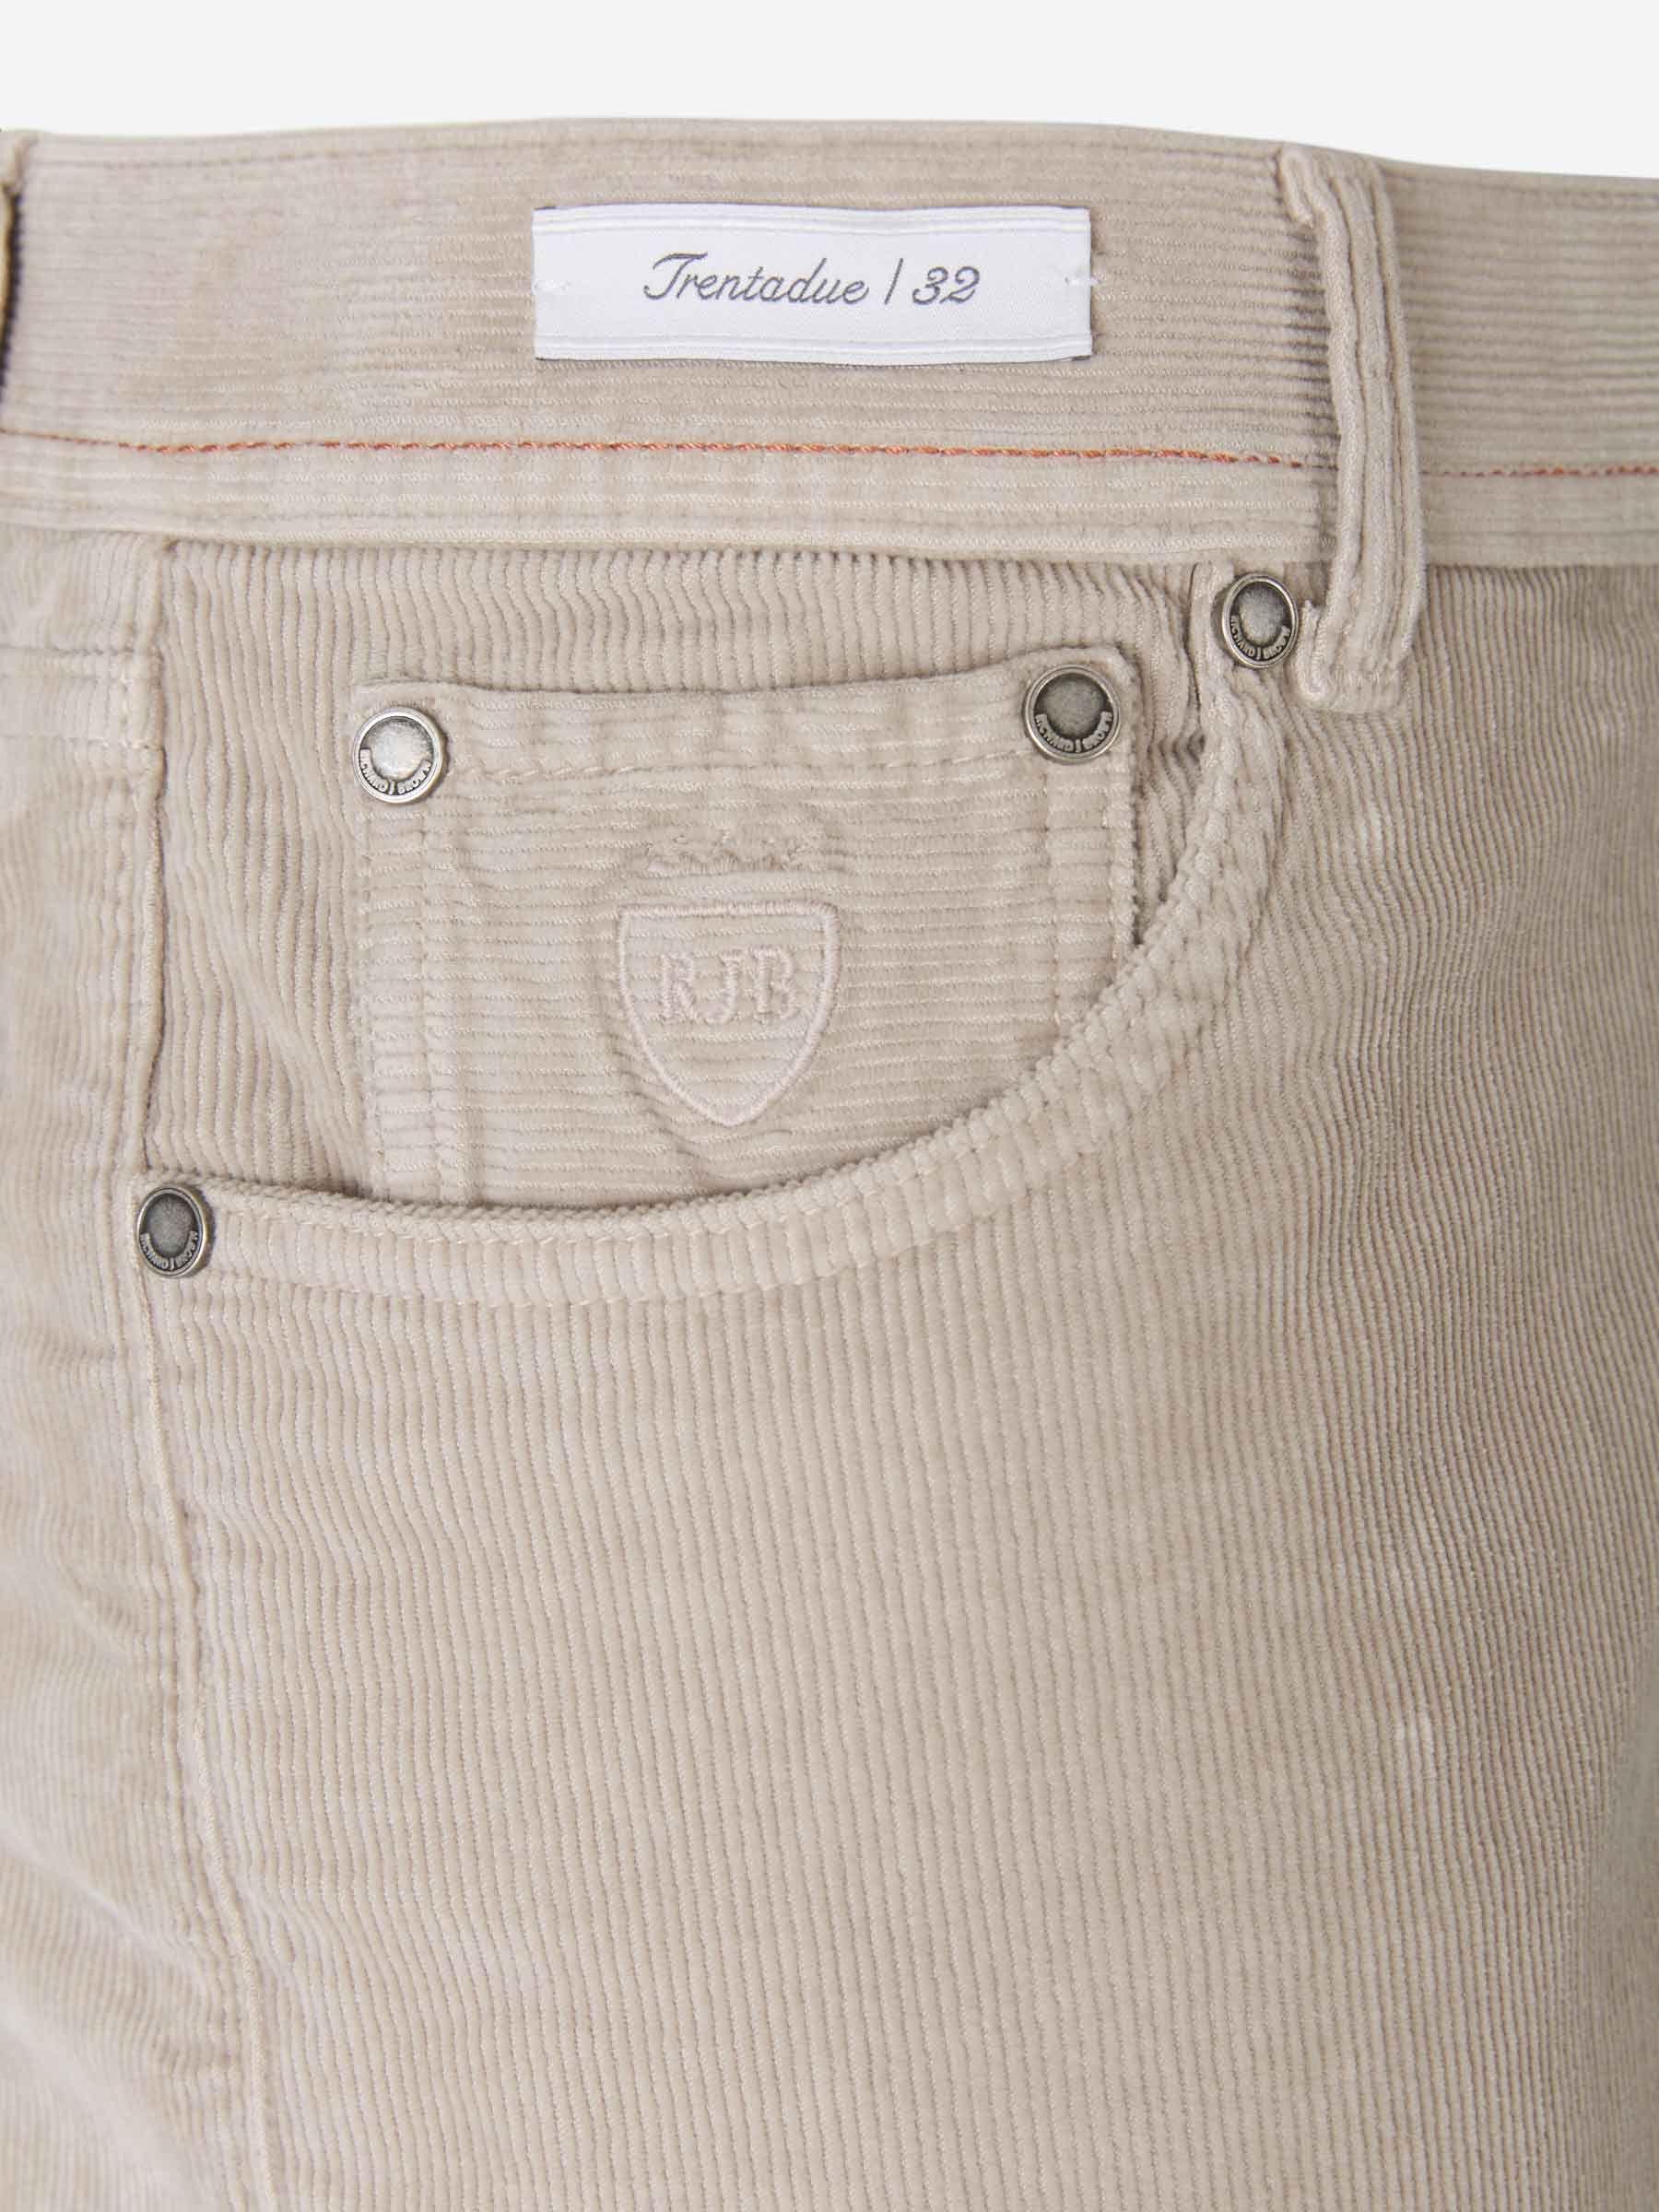 richard j. brown Corduroy Cotton Jeans in Natural for Men | Lyst